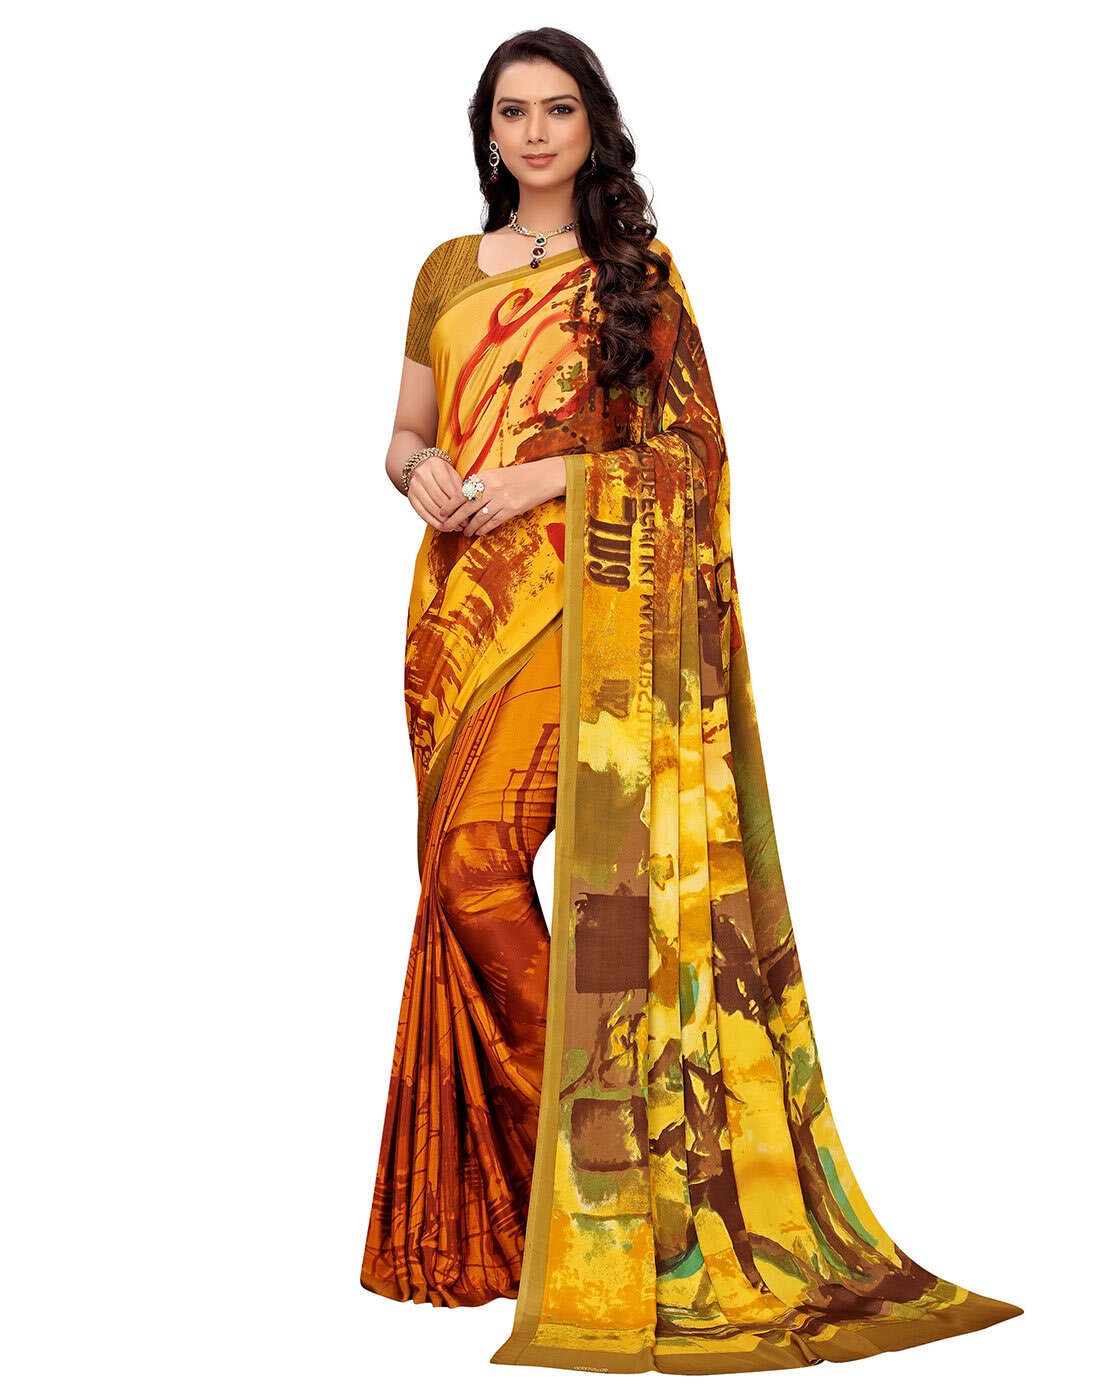 Jaanvi Fashion - The style of retro sarees combined with contemporary  modern and new designs printed in various shades and hües of splendid and  bright colors of class. This Printed Crepe Saree